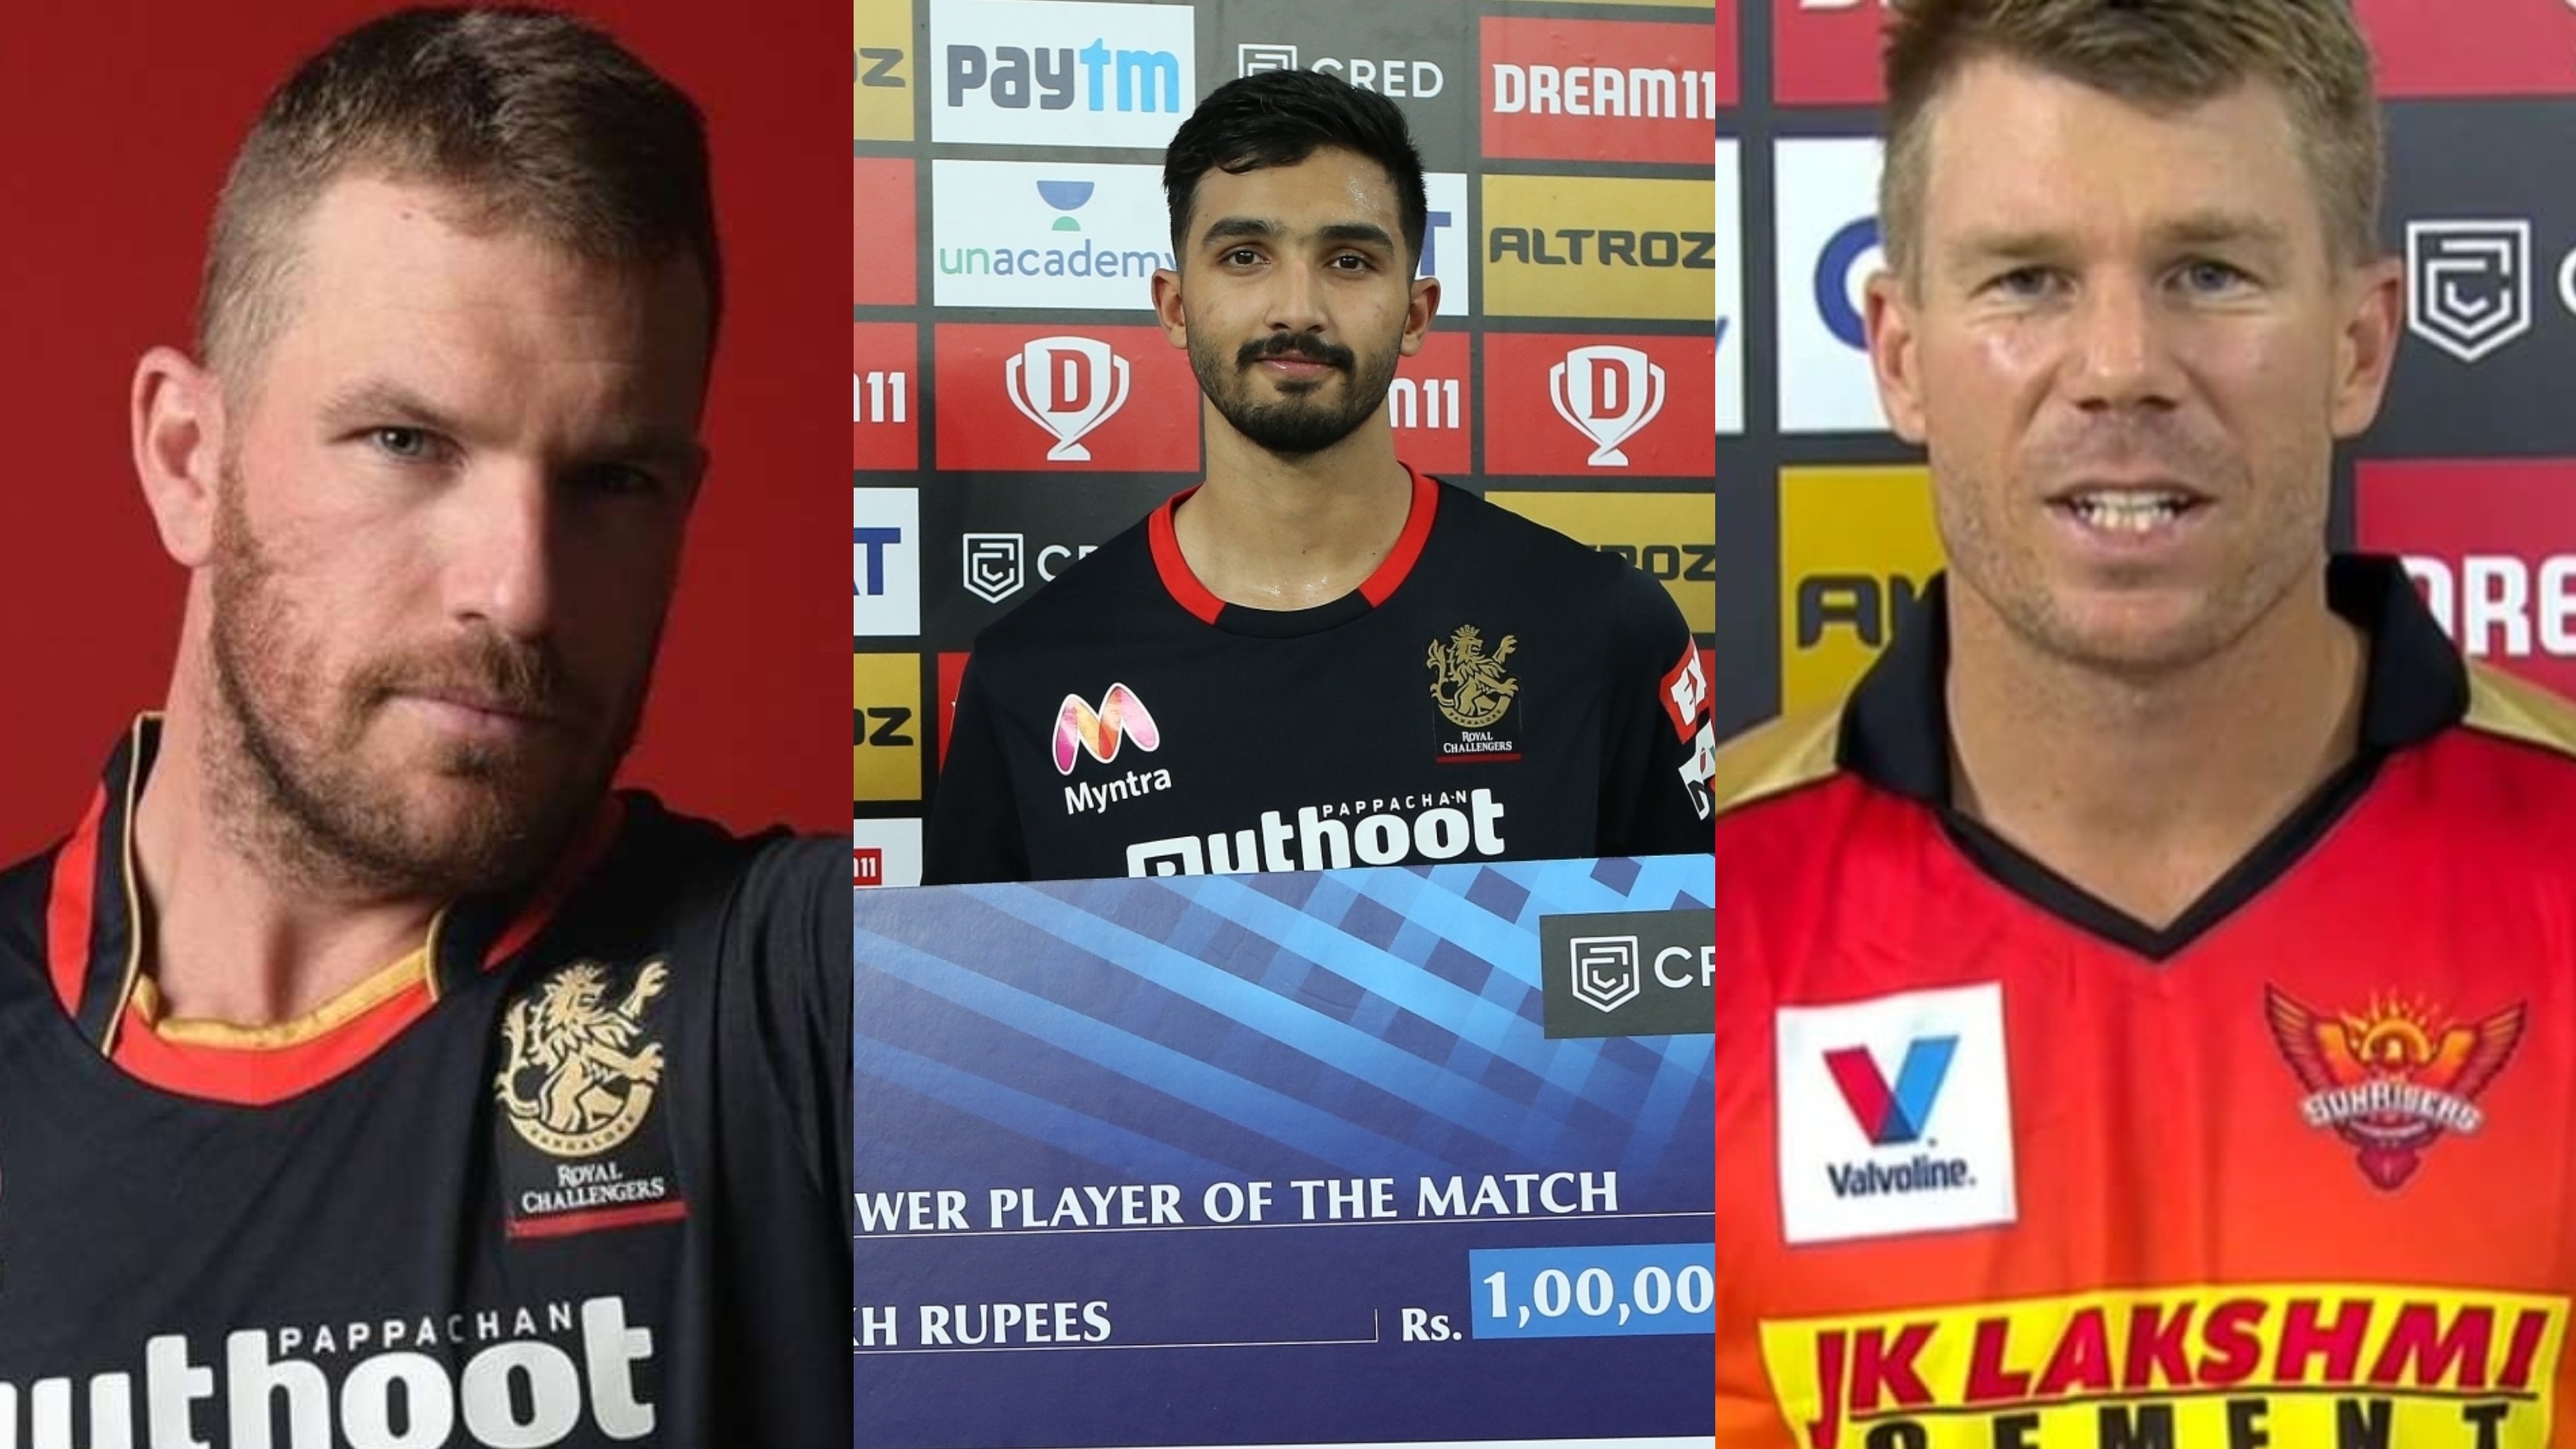 IPL 2020: Warner, Finch and De Villiers laud young guns Padikkal and Priyam after RCB v SRH match